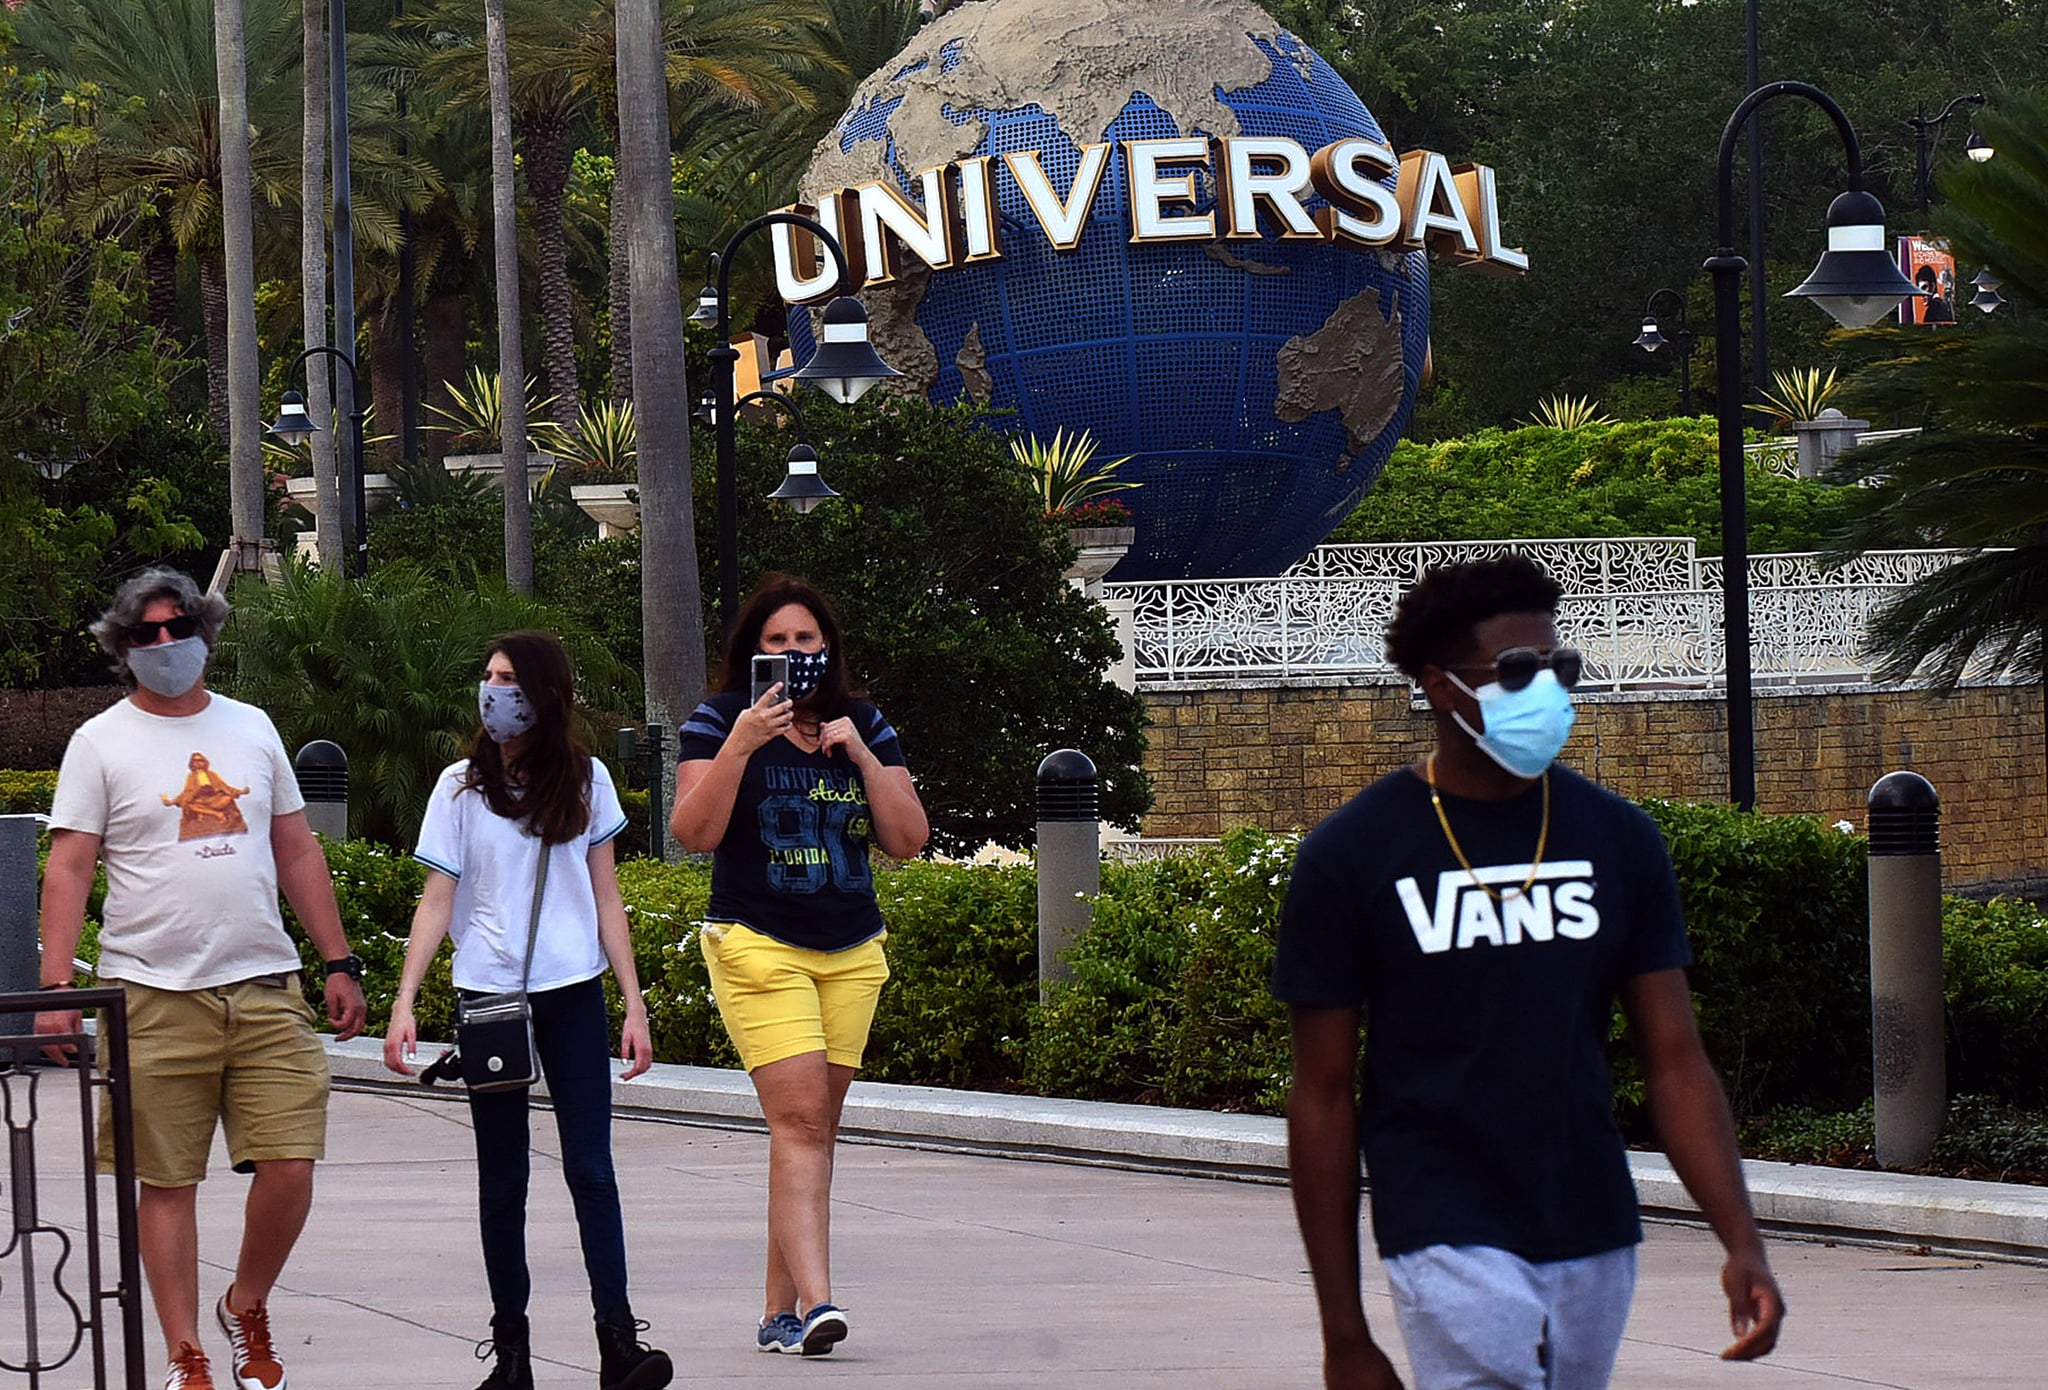 ORLANDO, UNITED STATES - MAY 14, 2020: Guests wearing face masks visit the Universal Orlando's CityWalk as sections of the entertainment and retail district opened today for limited hours for the first time since Universal Orlando closed on March 15, 2020 due to the coronavirus pandemic. In addition to face coverings, temperature checks are also being required. Universal's theme parks will remain closed until at least May 31.- PHOTOGRAPH BY Paul Hennessy / Echoes Wire/ Barcroft Studios / Future Publishing (Photo credit should read Paul Hennessy / Echoes Wire/Barcroft Media via Getty Images)